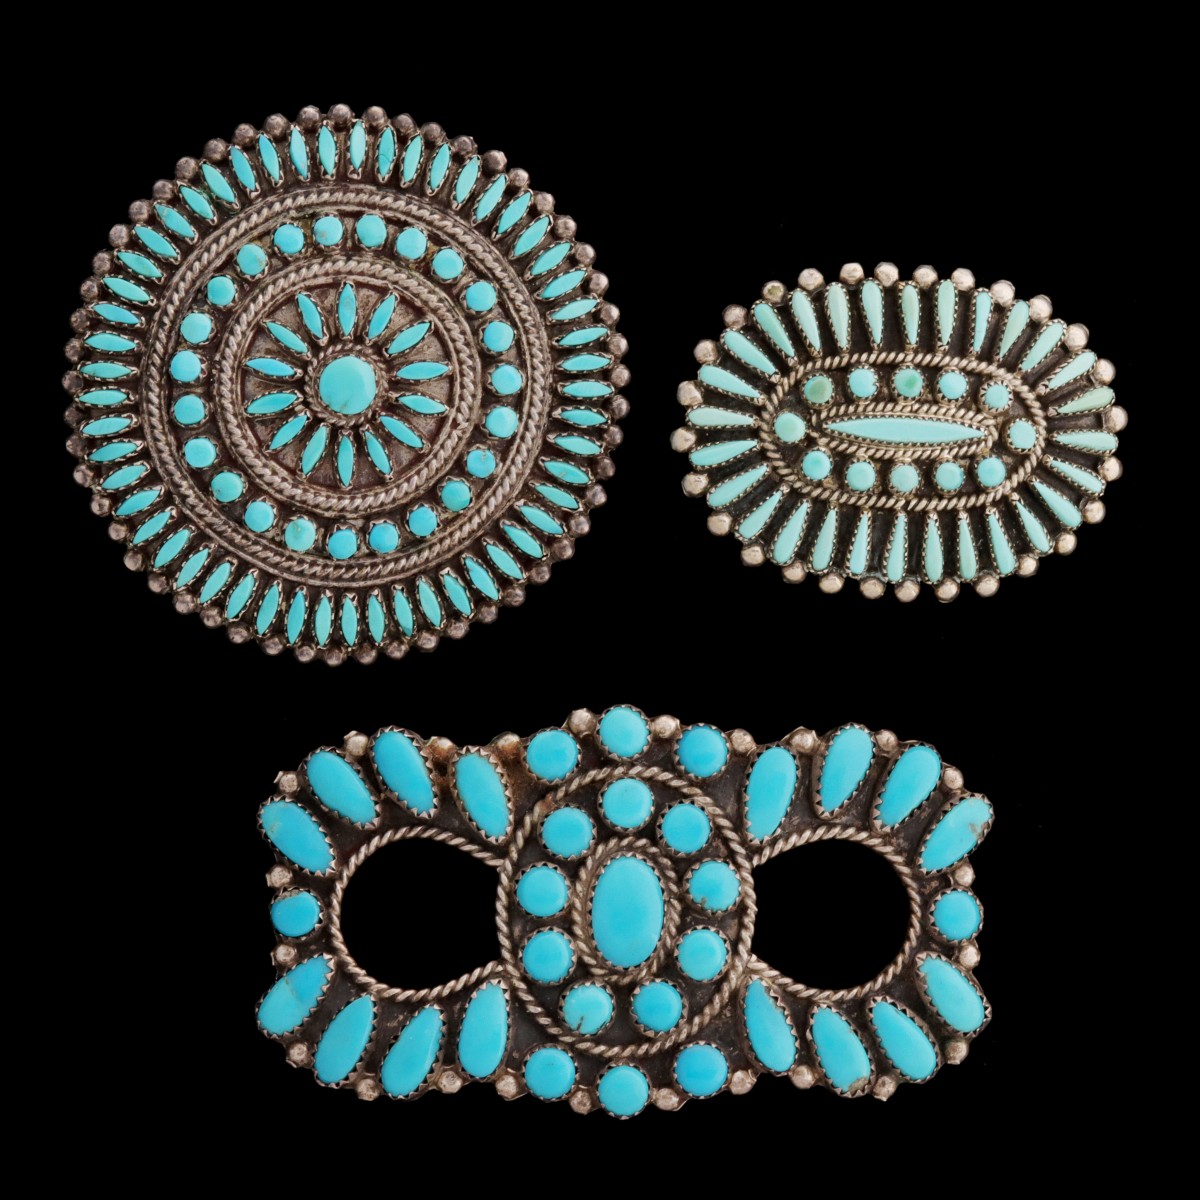 THREE FINE ZUNI PETIT POINT TURQUOISE BROOCHES